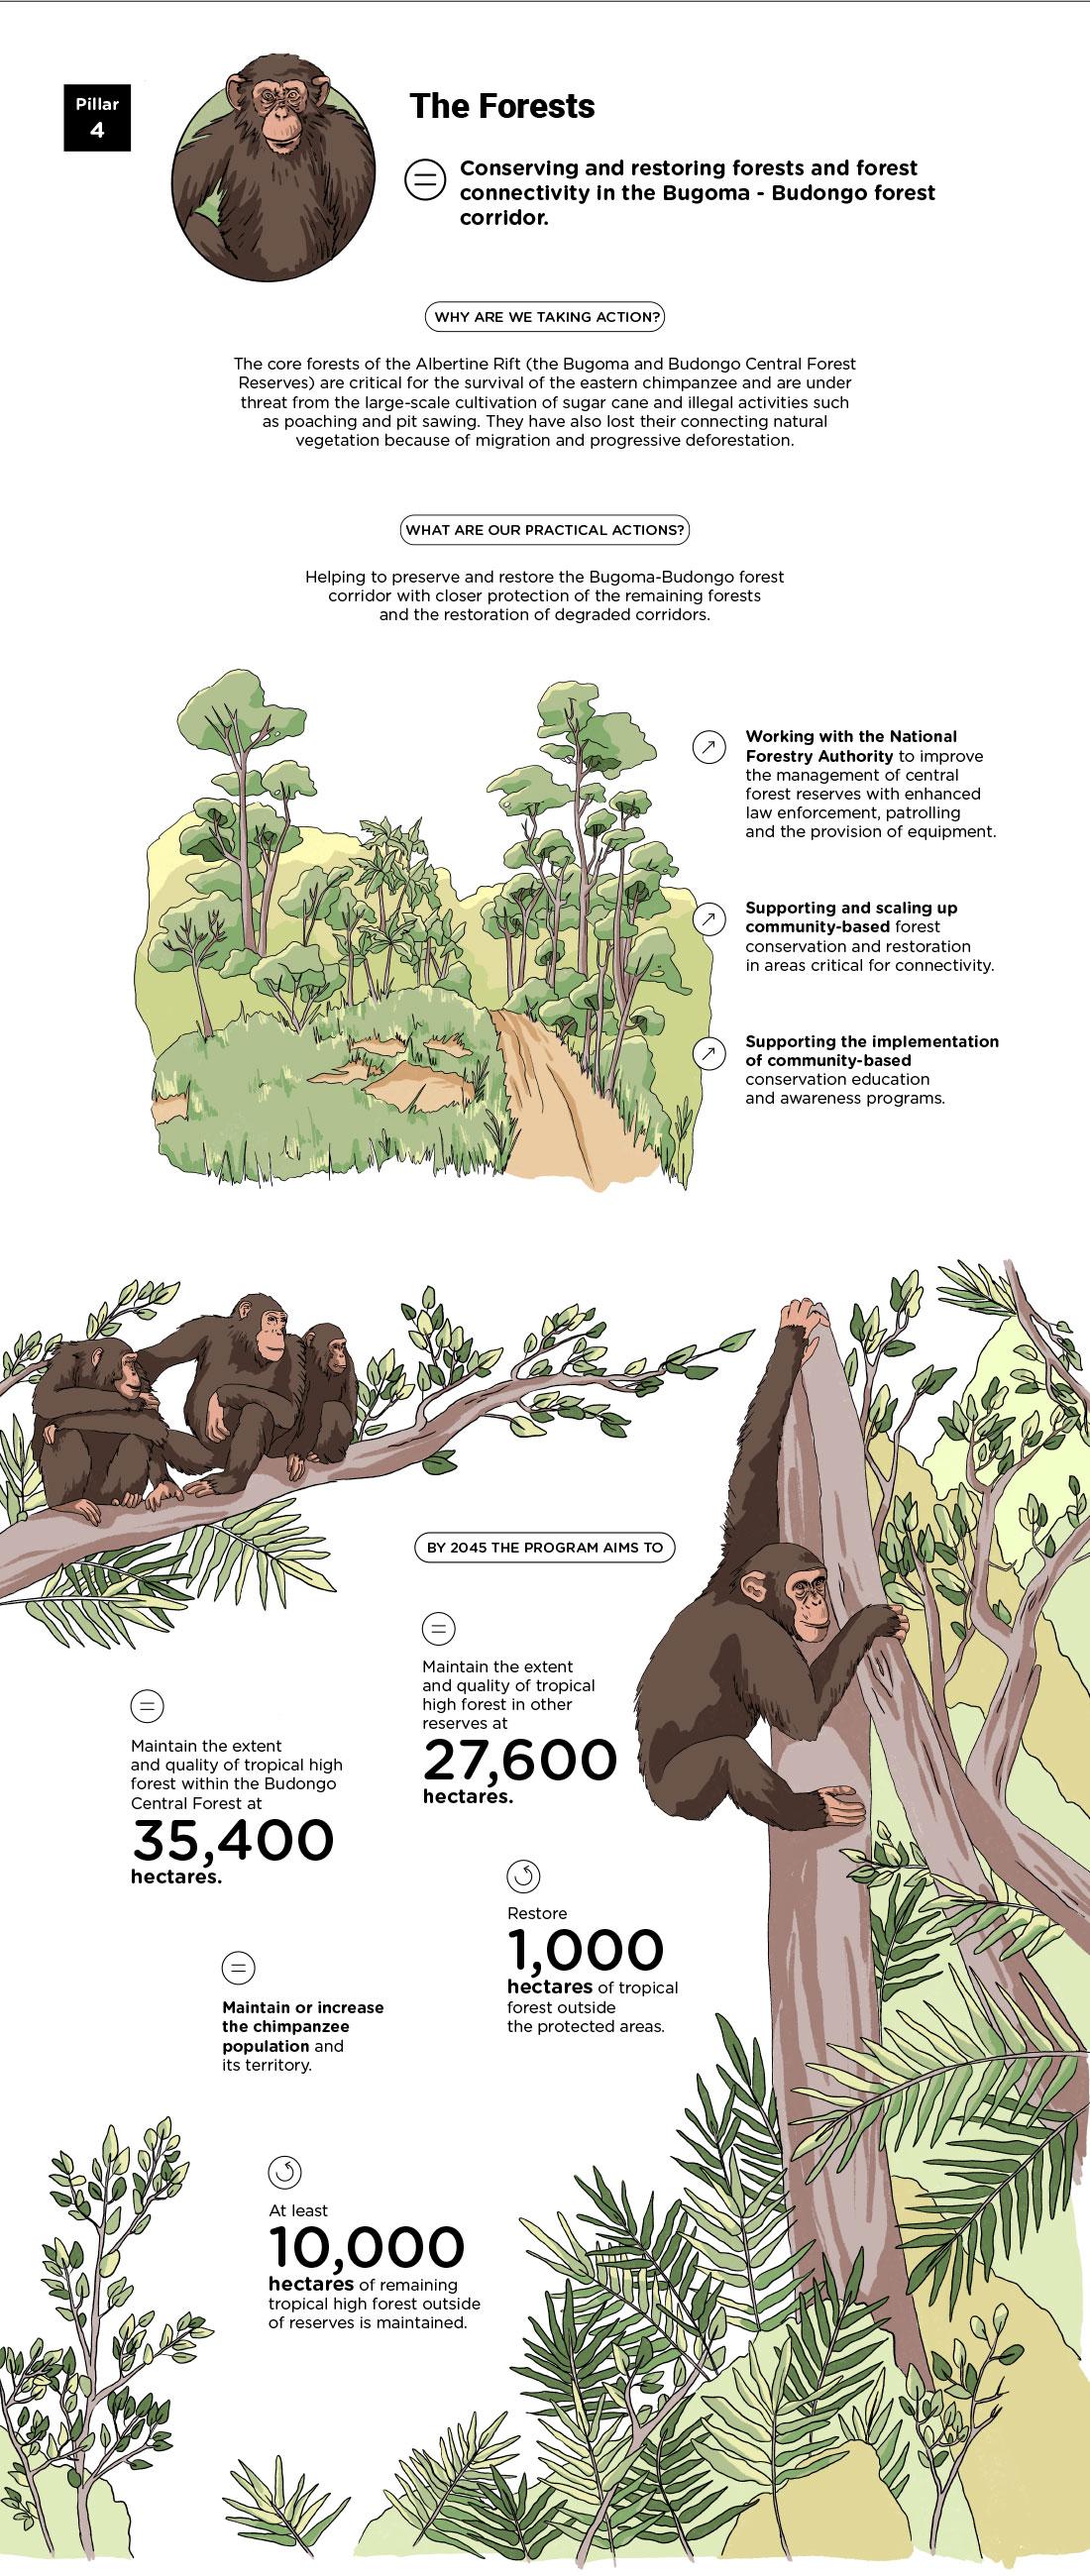 Infographics « Pillar 4: The Forests » - see detailed description hereafter